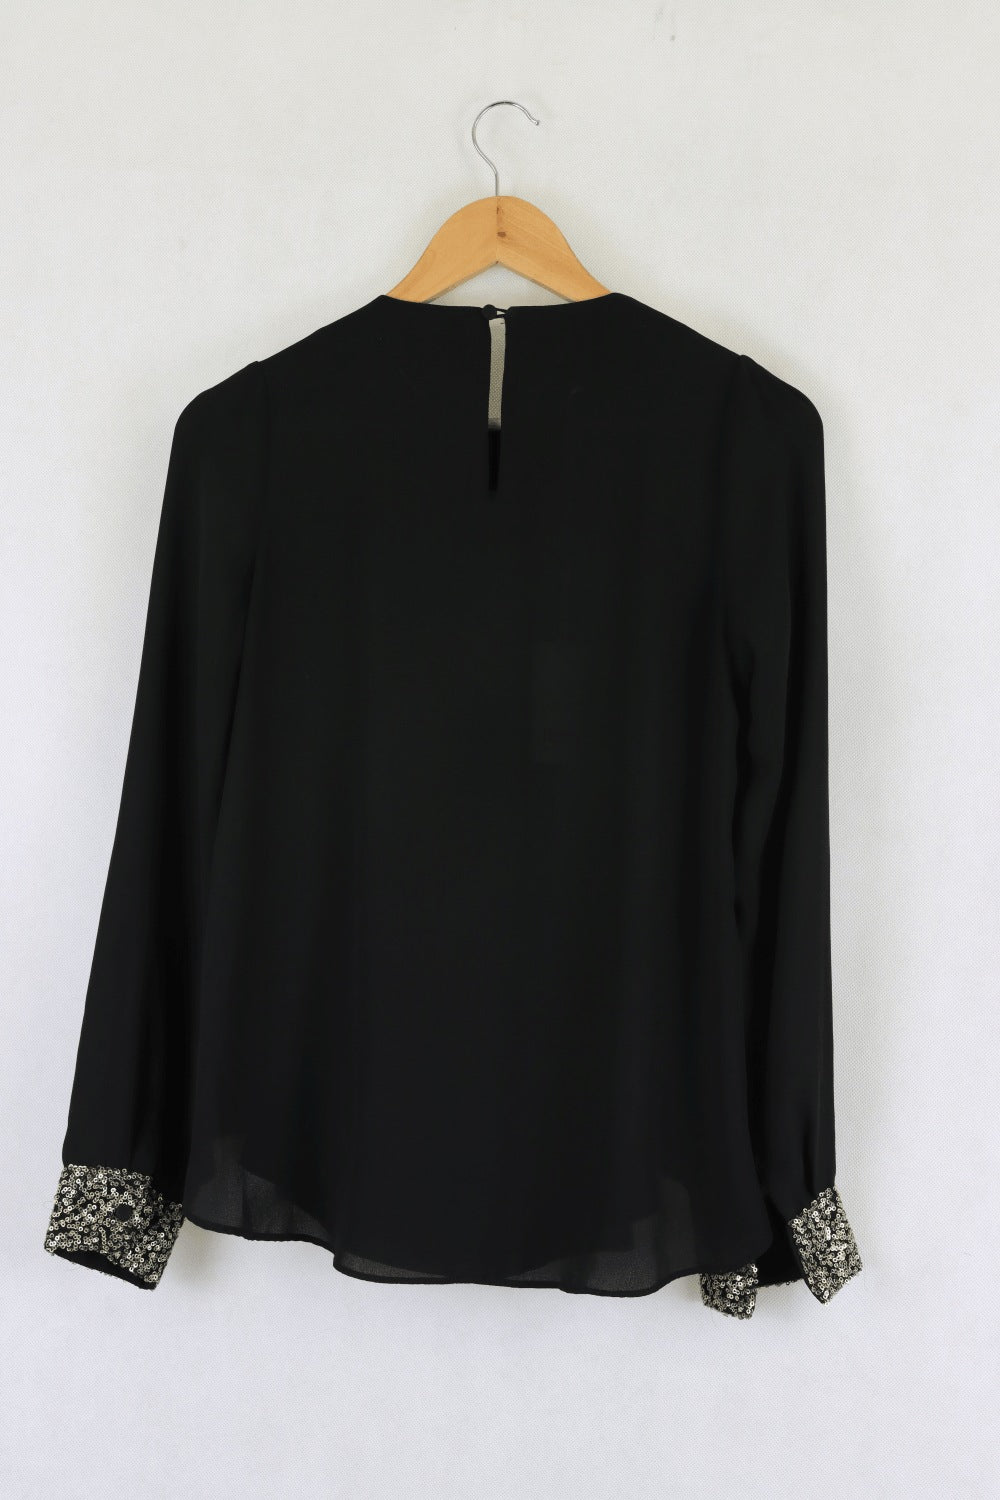 Sheike black top with gold detailing 8